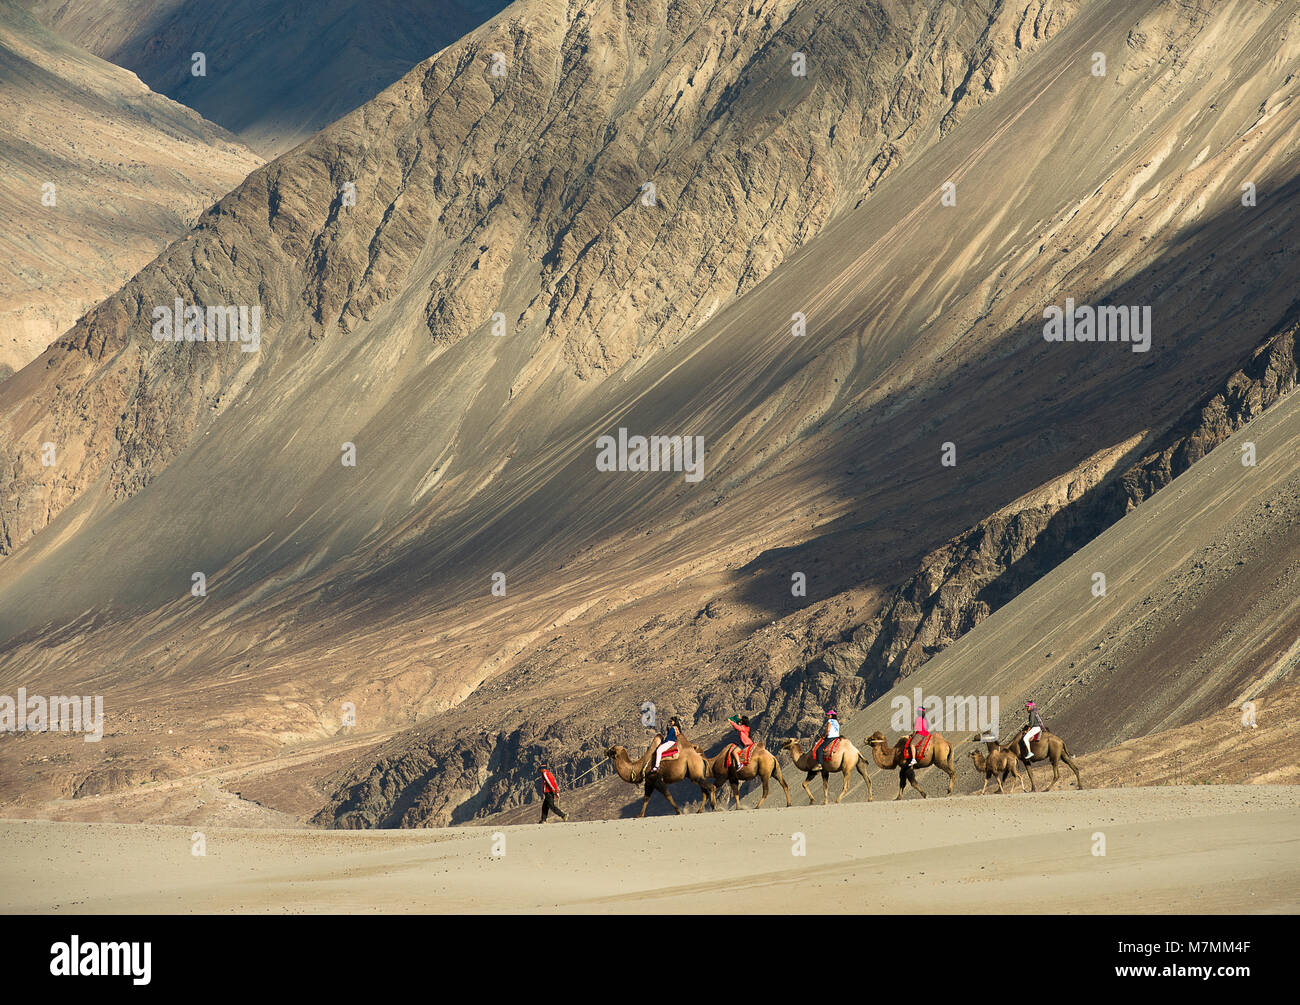 Bactrian Camels against Sand dunes at Nubra Valley Stock Photo